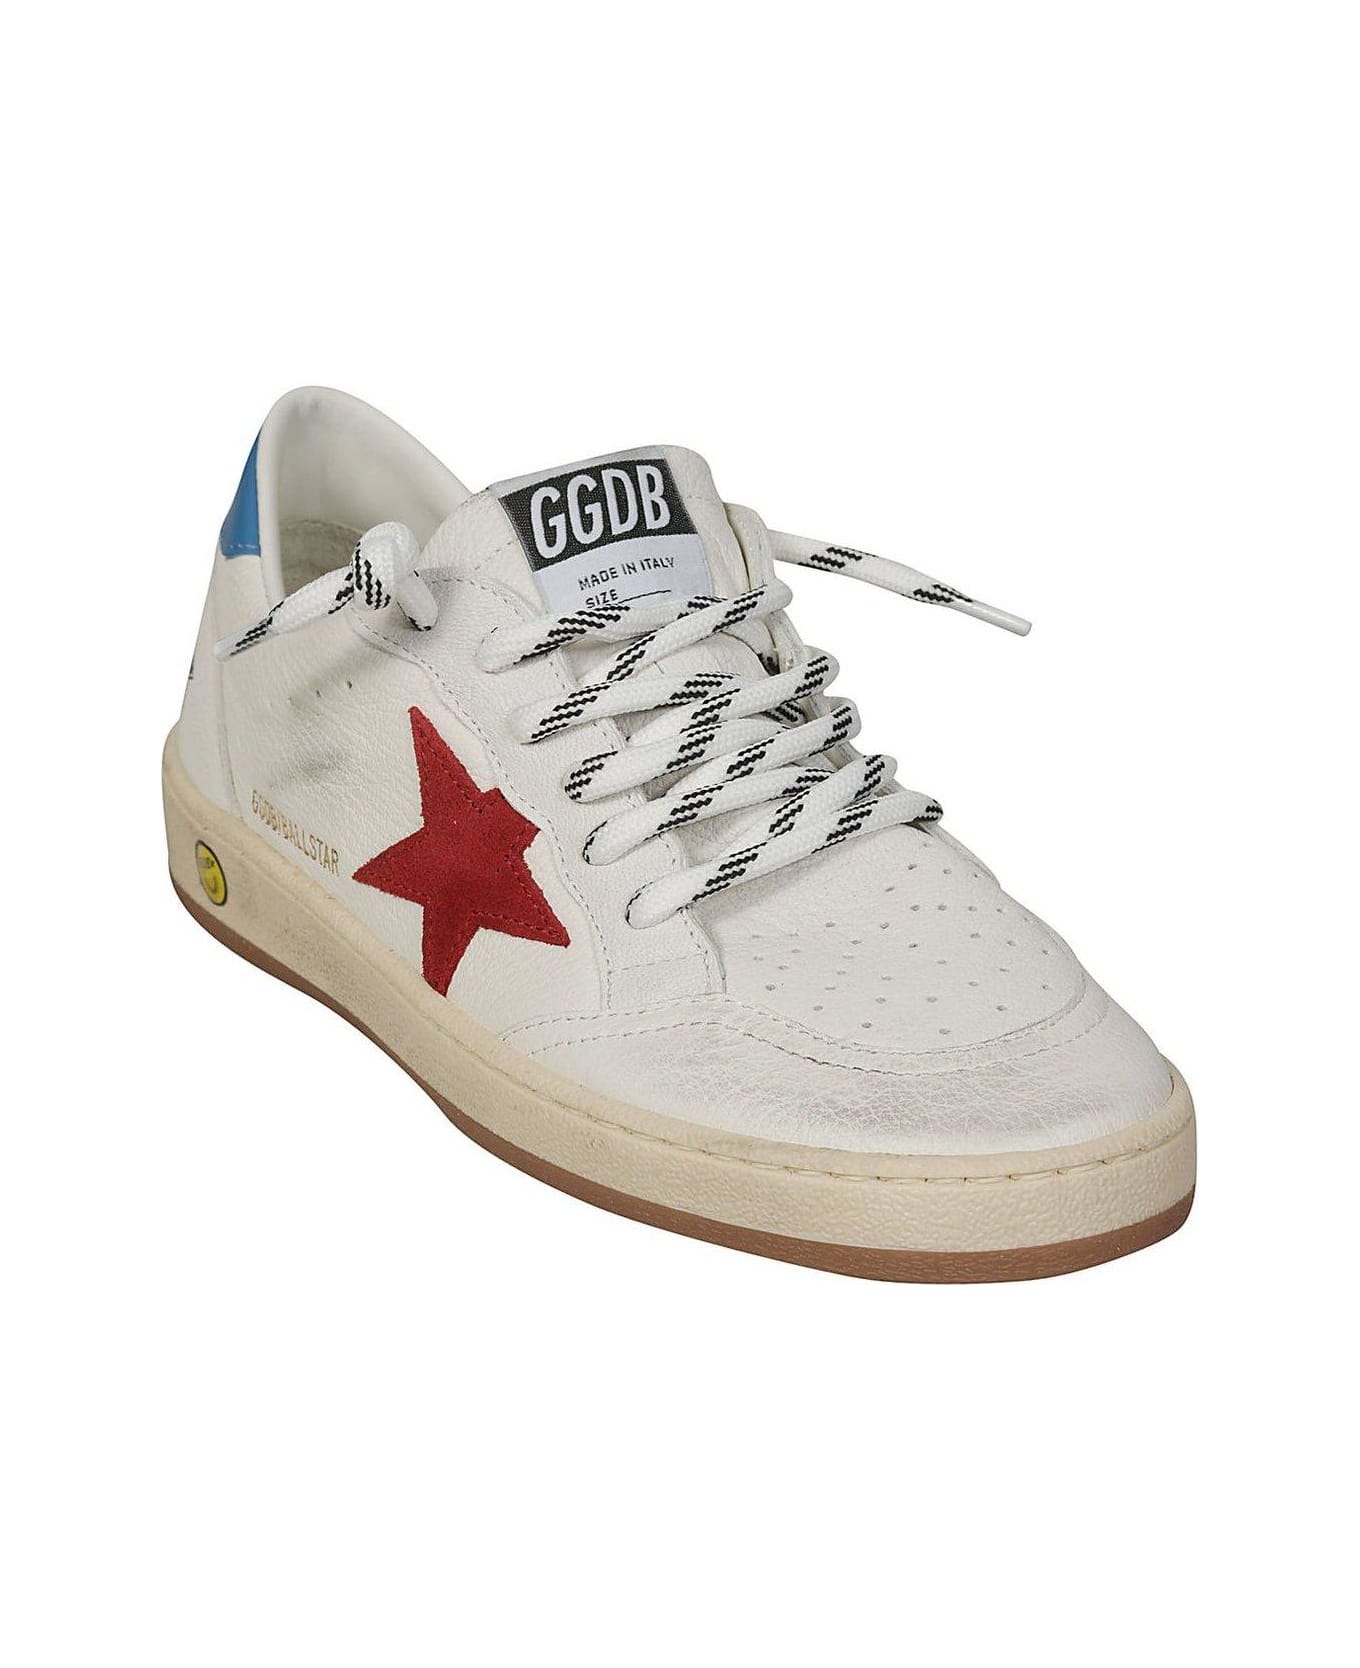 Golden Goose Ball Star-patch Lace-up Sneakers - White/Red/Blue